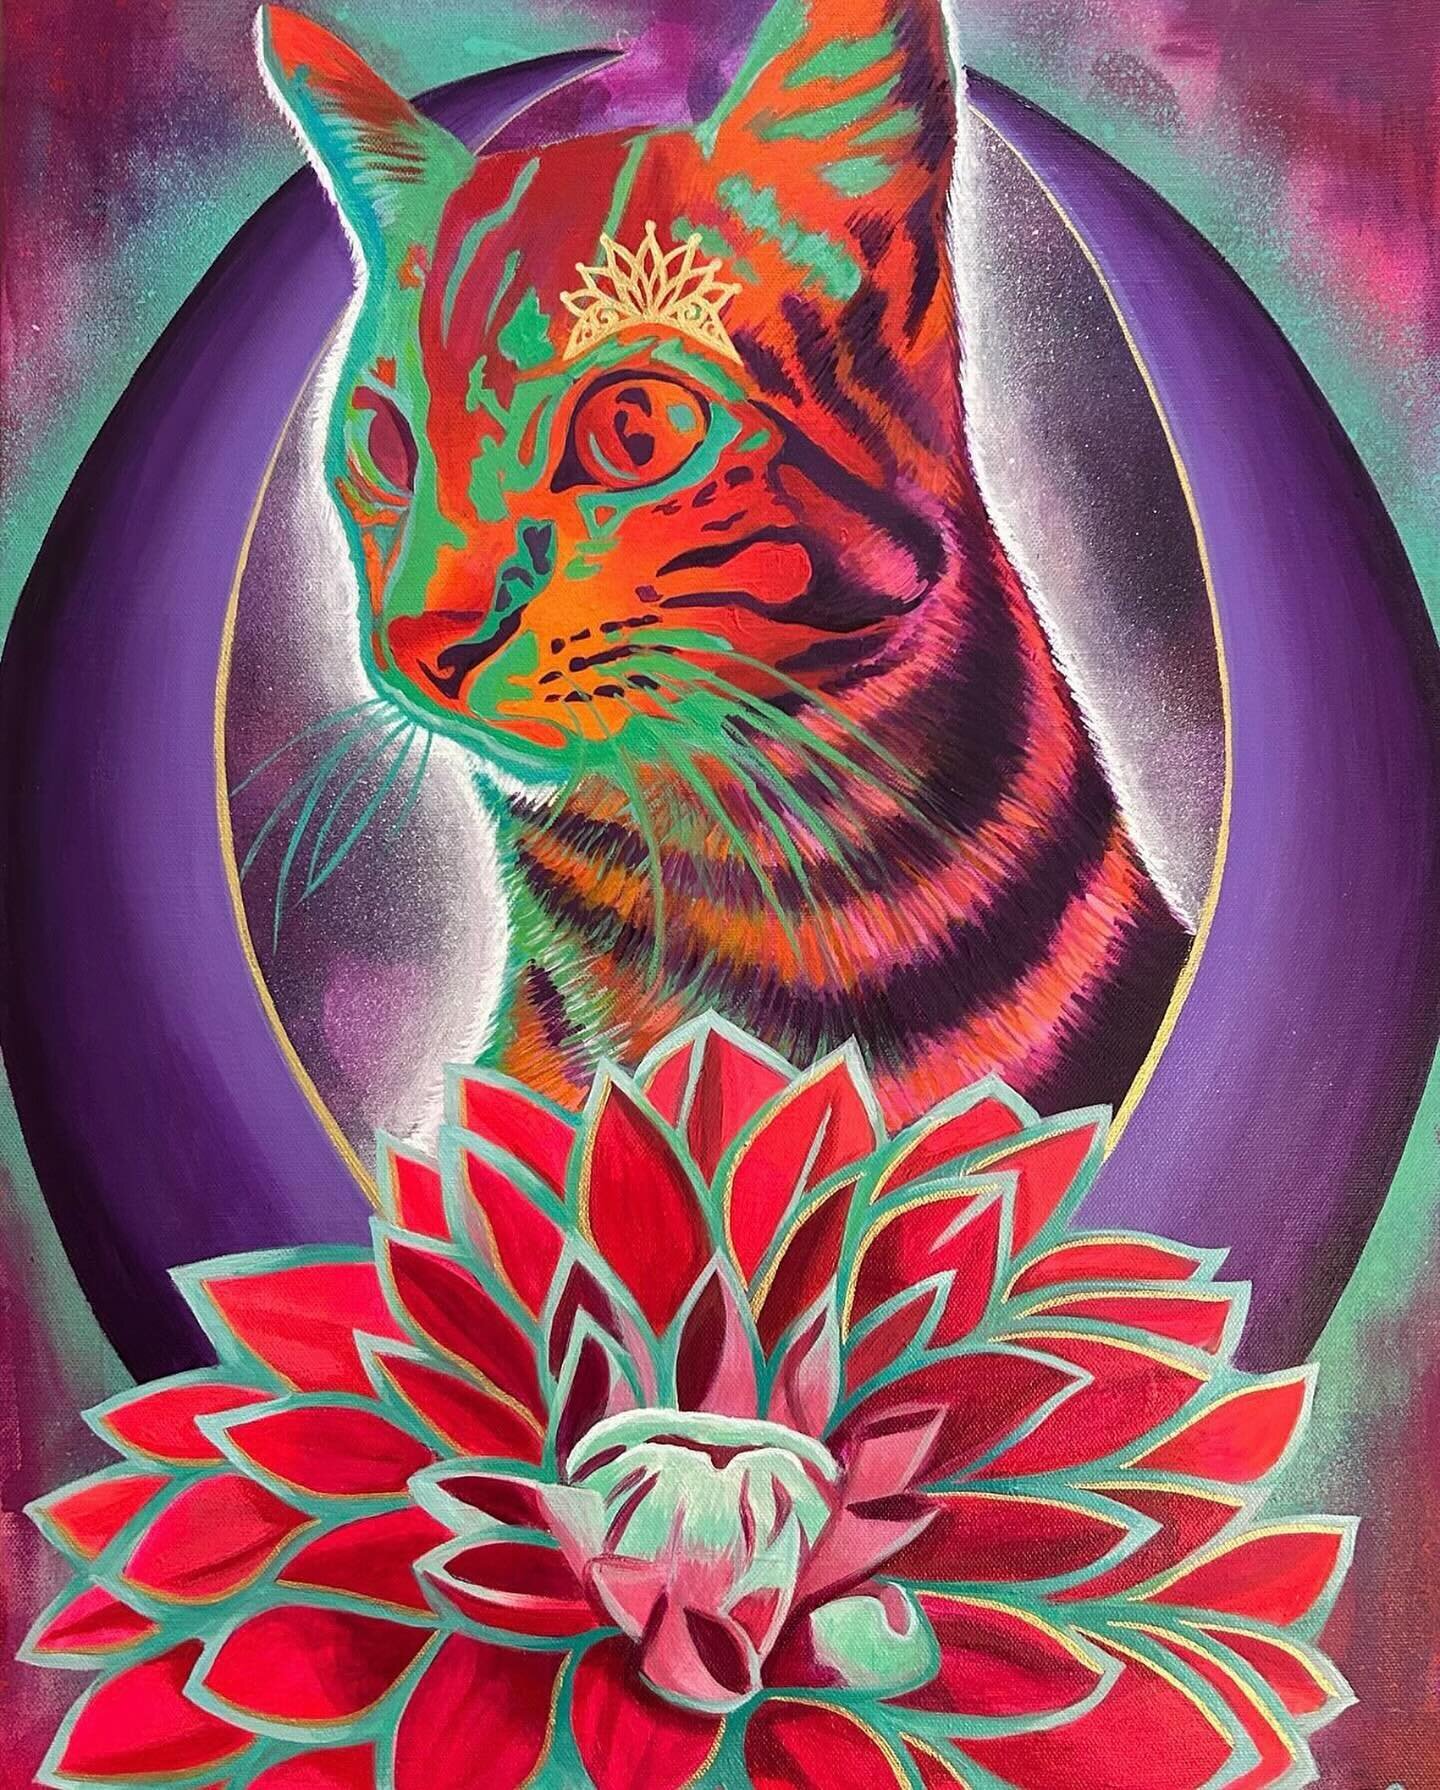 It turns out you CAN buy spiritual protection. 😸✨

&ldquo;Spiritual Protector&rdquo; 
Artist: @loretoh.art
Acrylic on canvas, 18&rdquo;x24&rdquo;
DM with inquiries 

&ldquo;I believe cats can protect their owners whenever they sense bad energy aroun